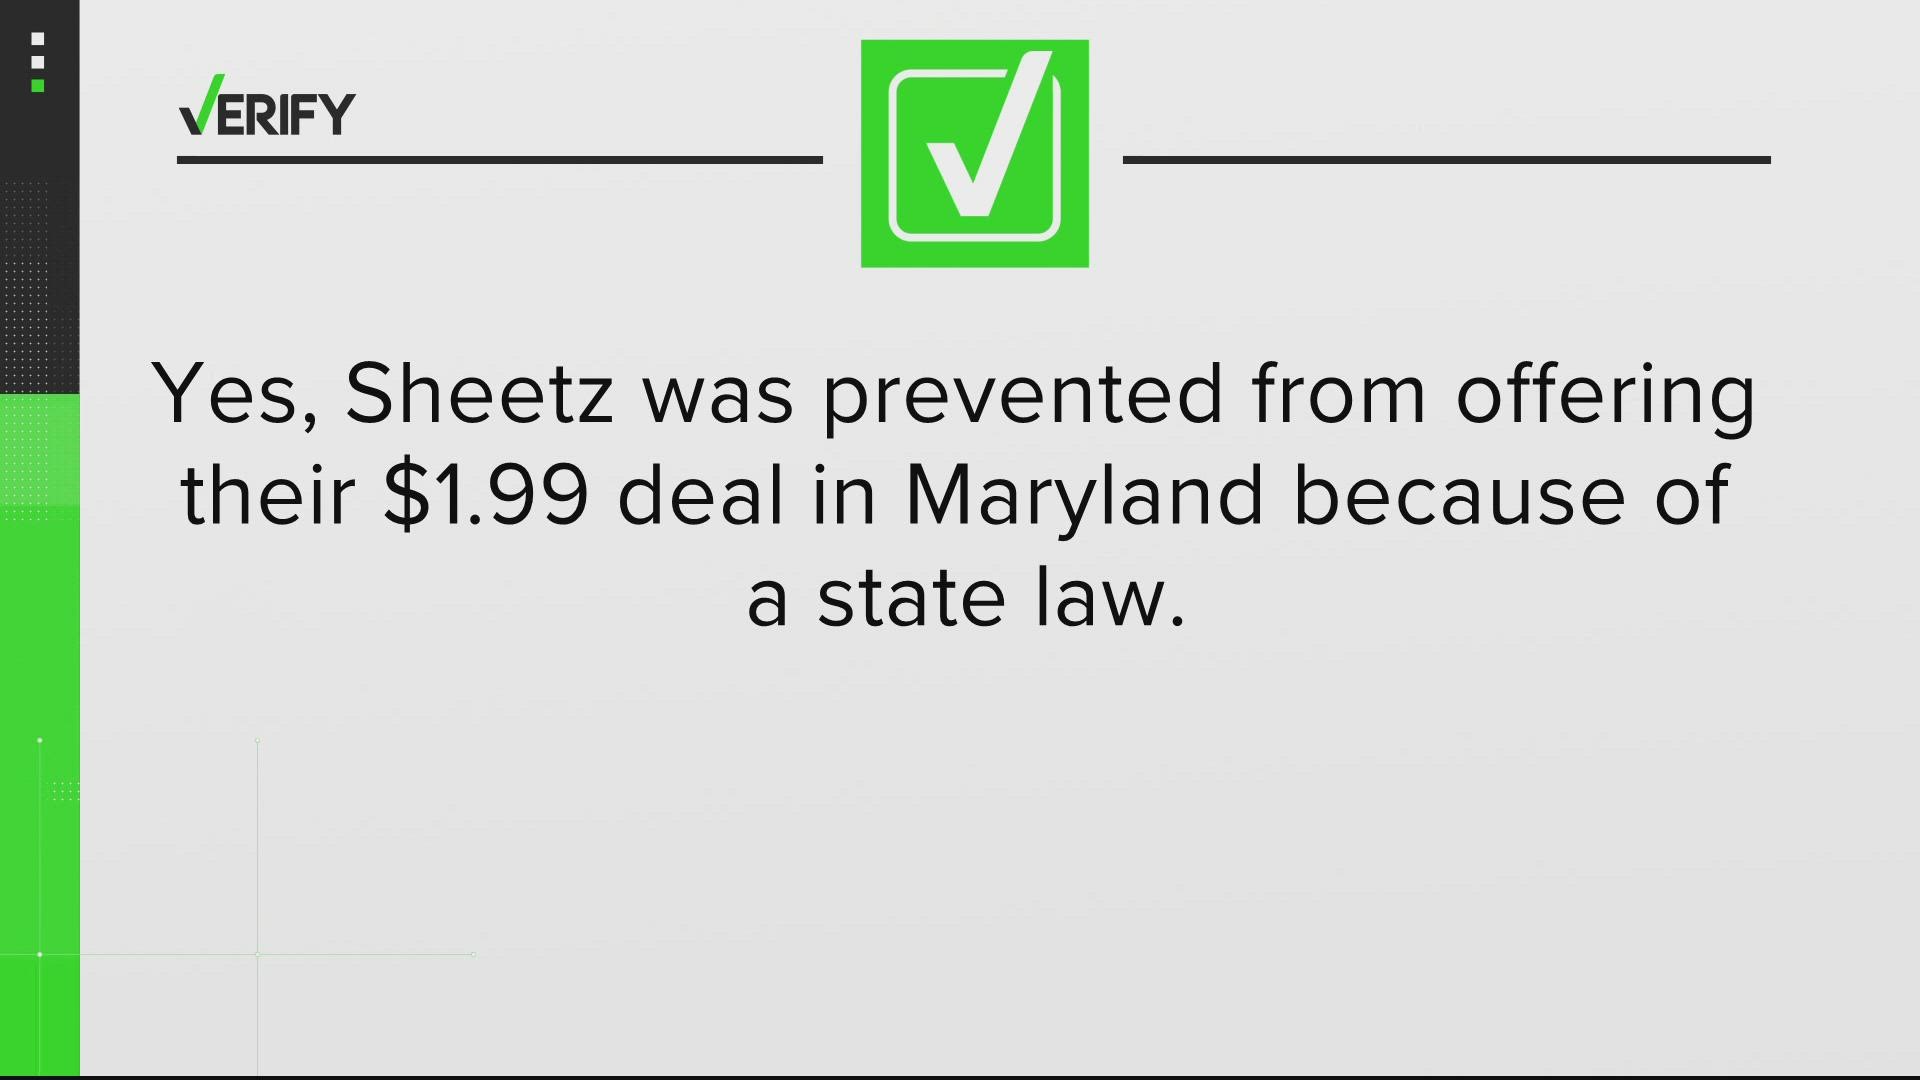 A Sheetz spokesperson told us "Maryland law prohibits selling fuel below cost. As a result, Sheetz discounted the sale of Unleaded 88 as low as possible."